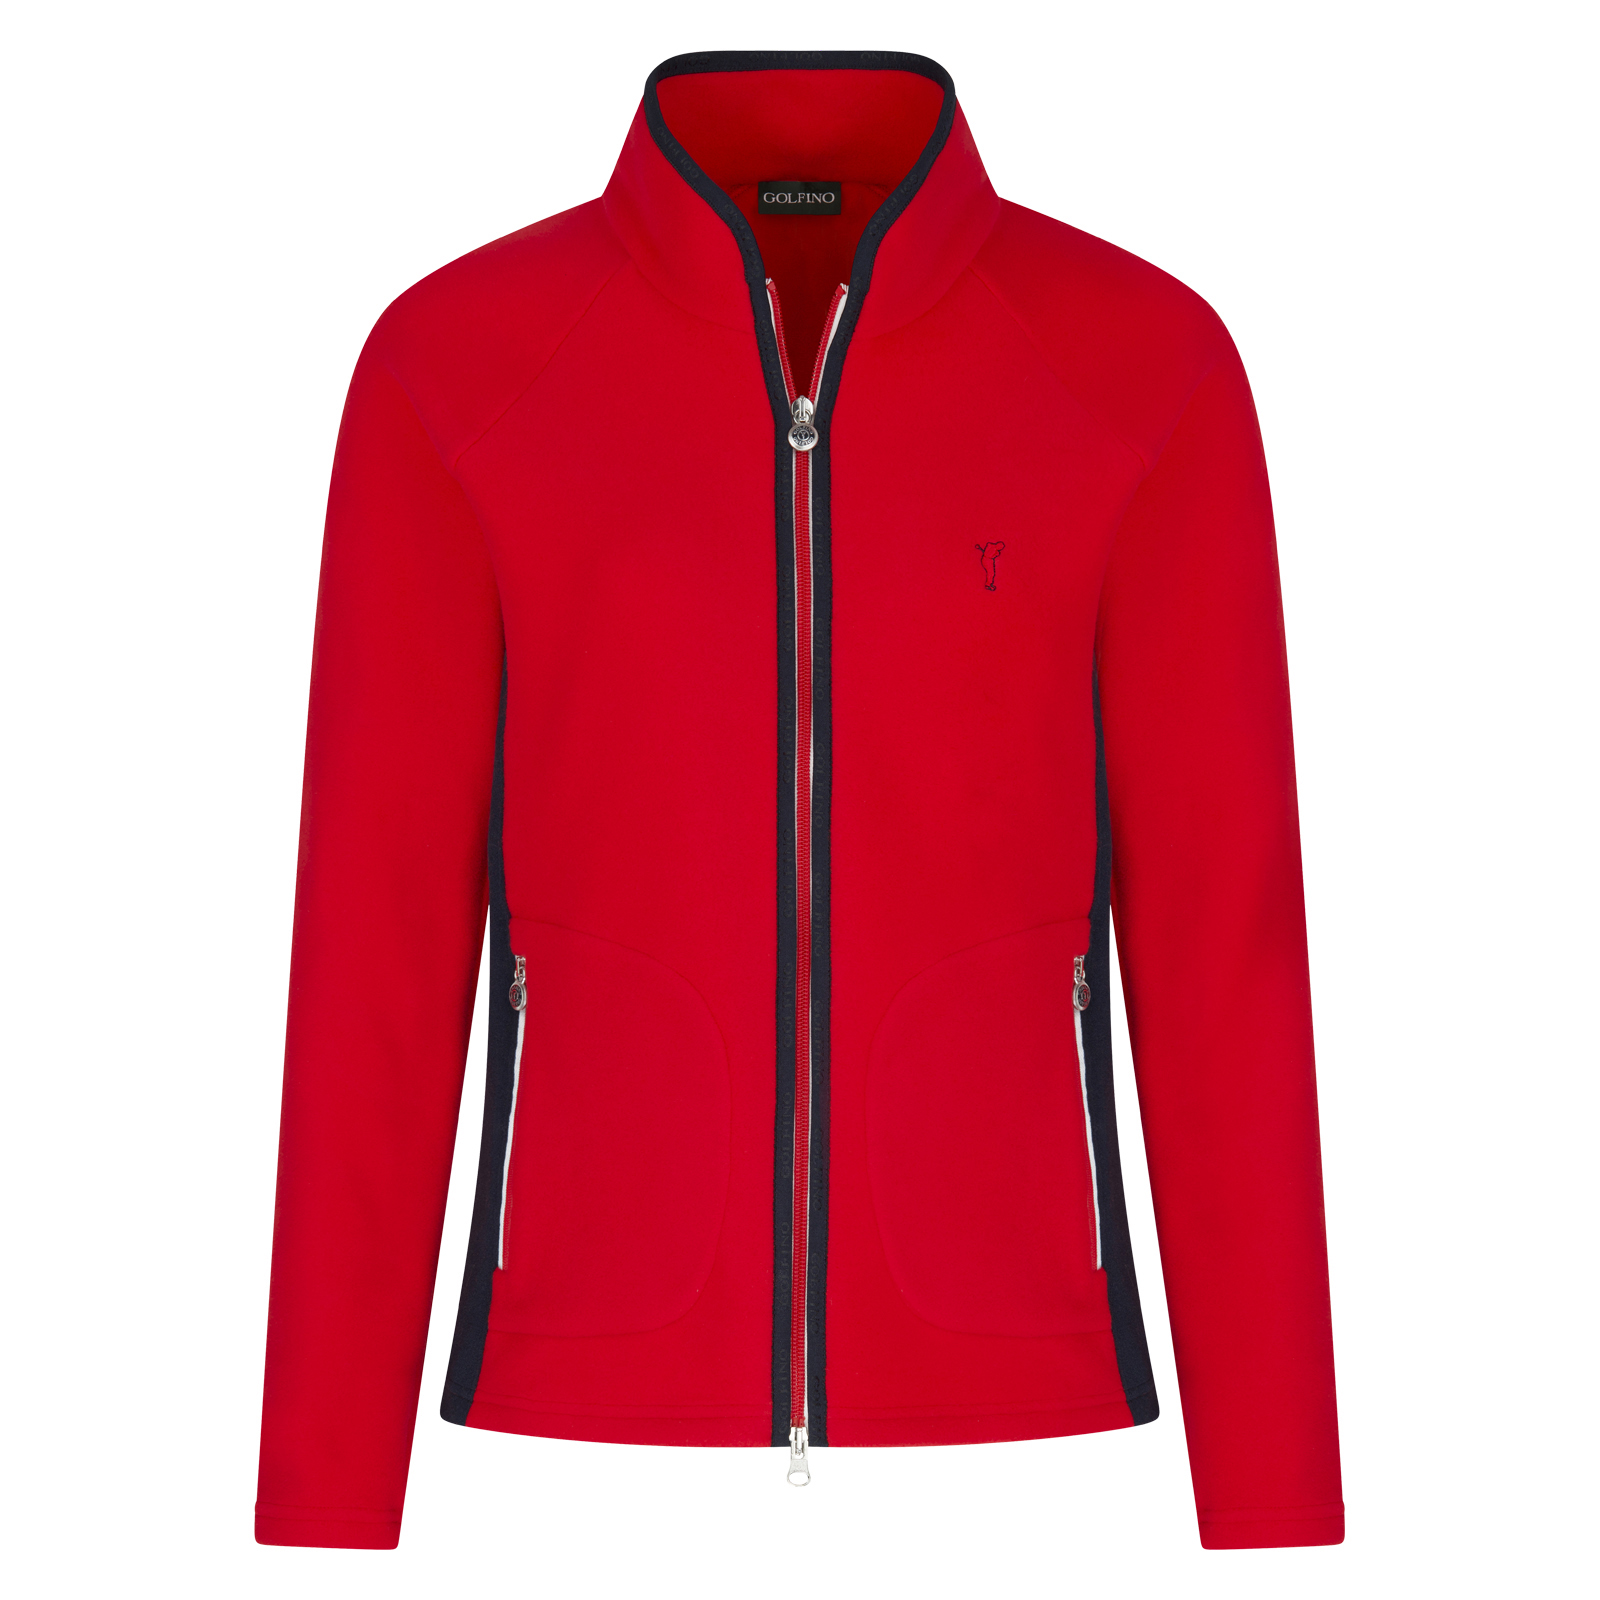 Ladies' soft fleece golf jacket with cold protection function